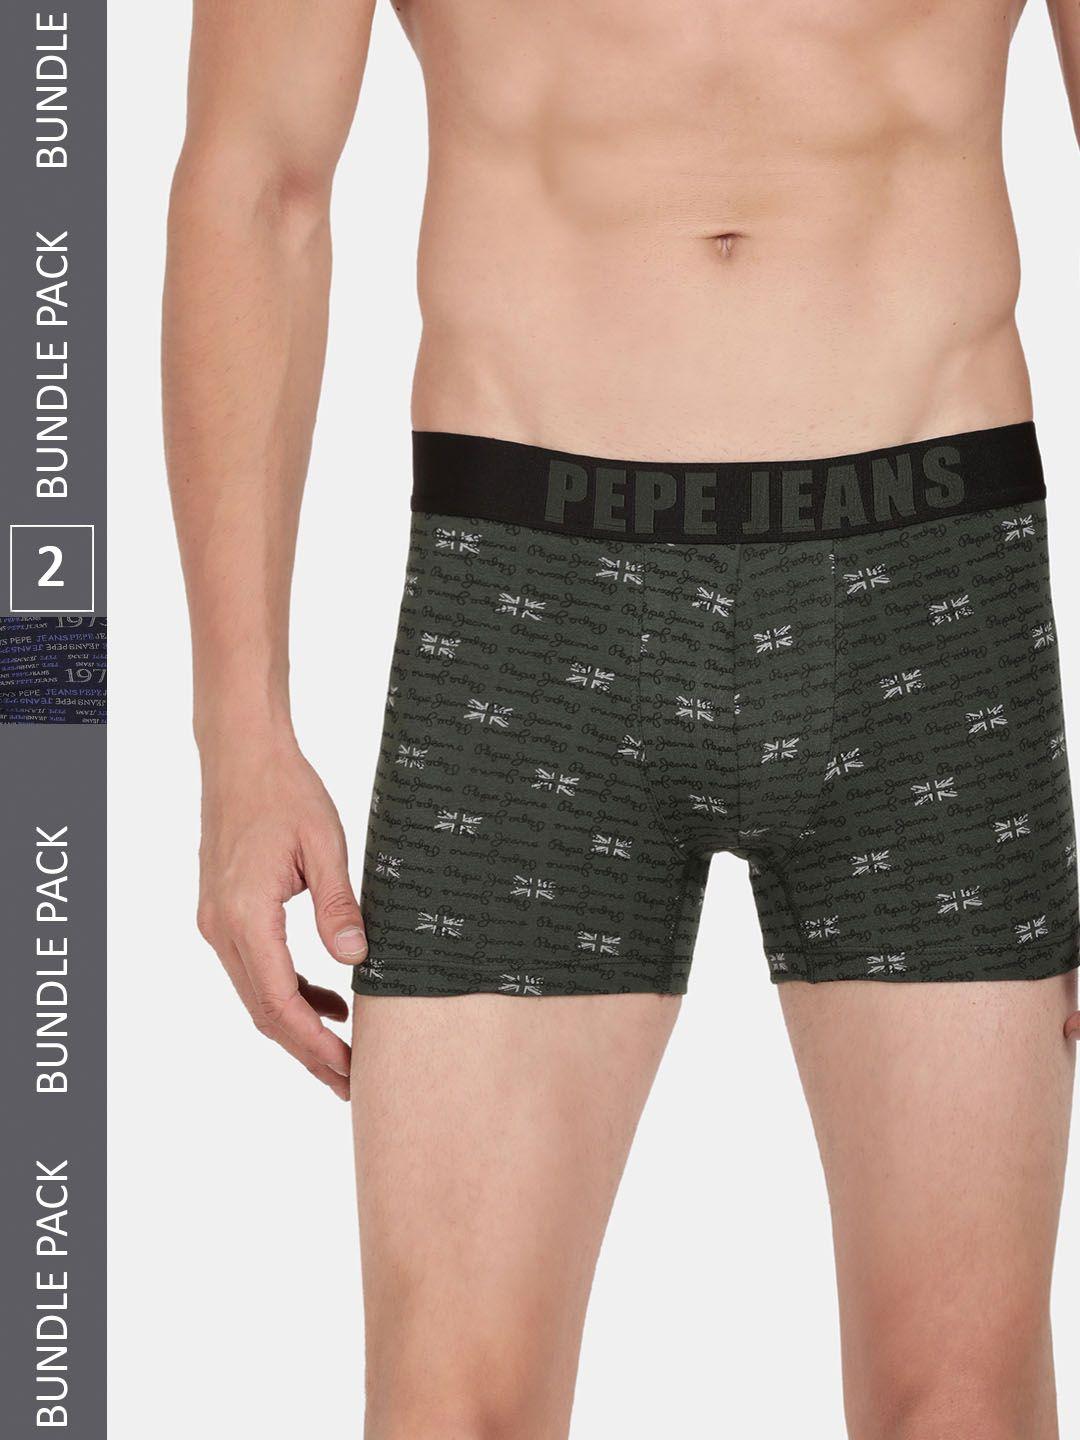 pepe jeans pack of 2 all over printed outer elastic cotton trunks